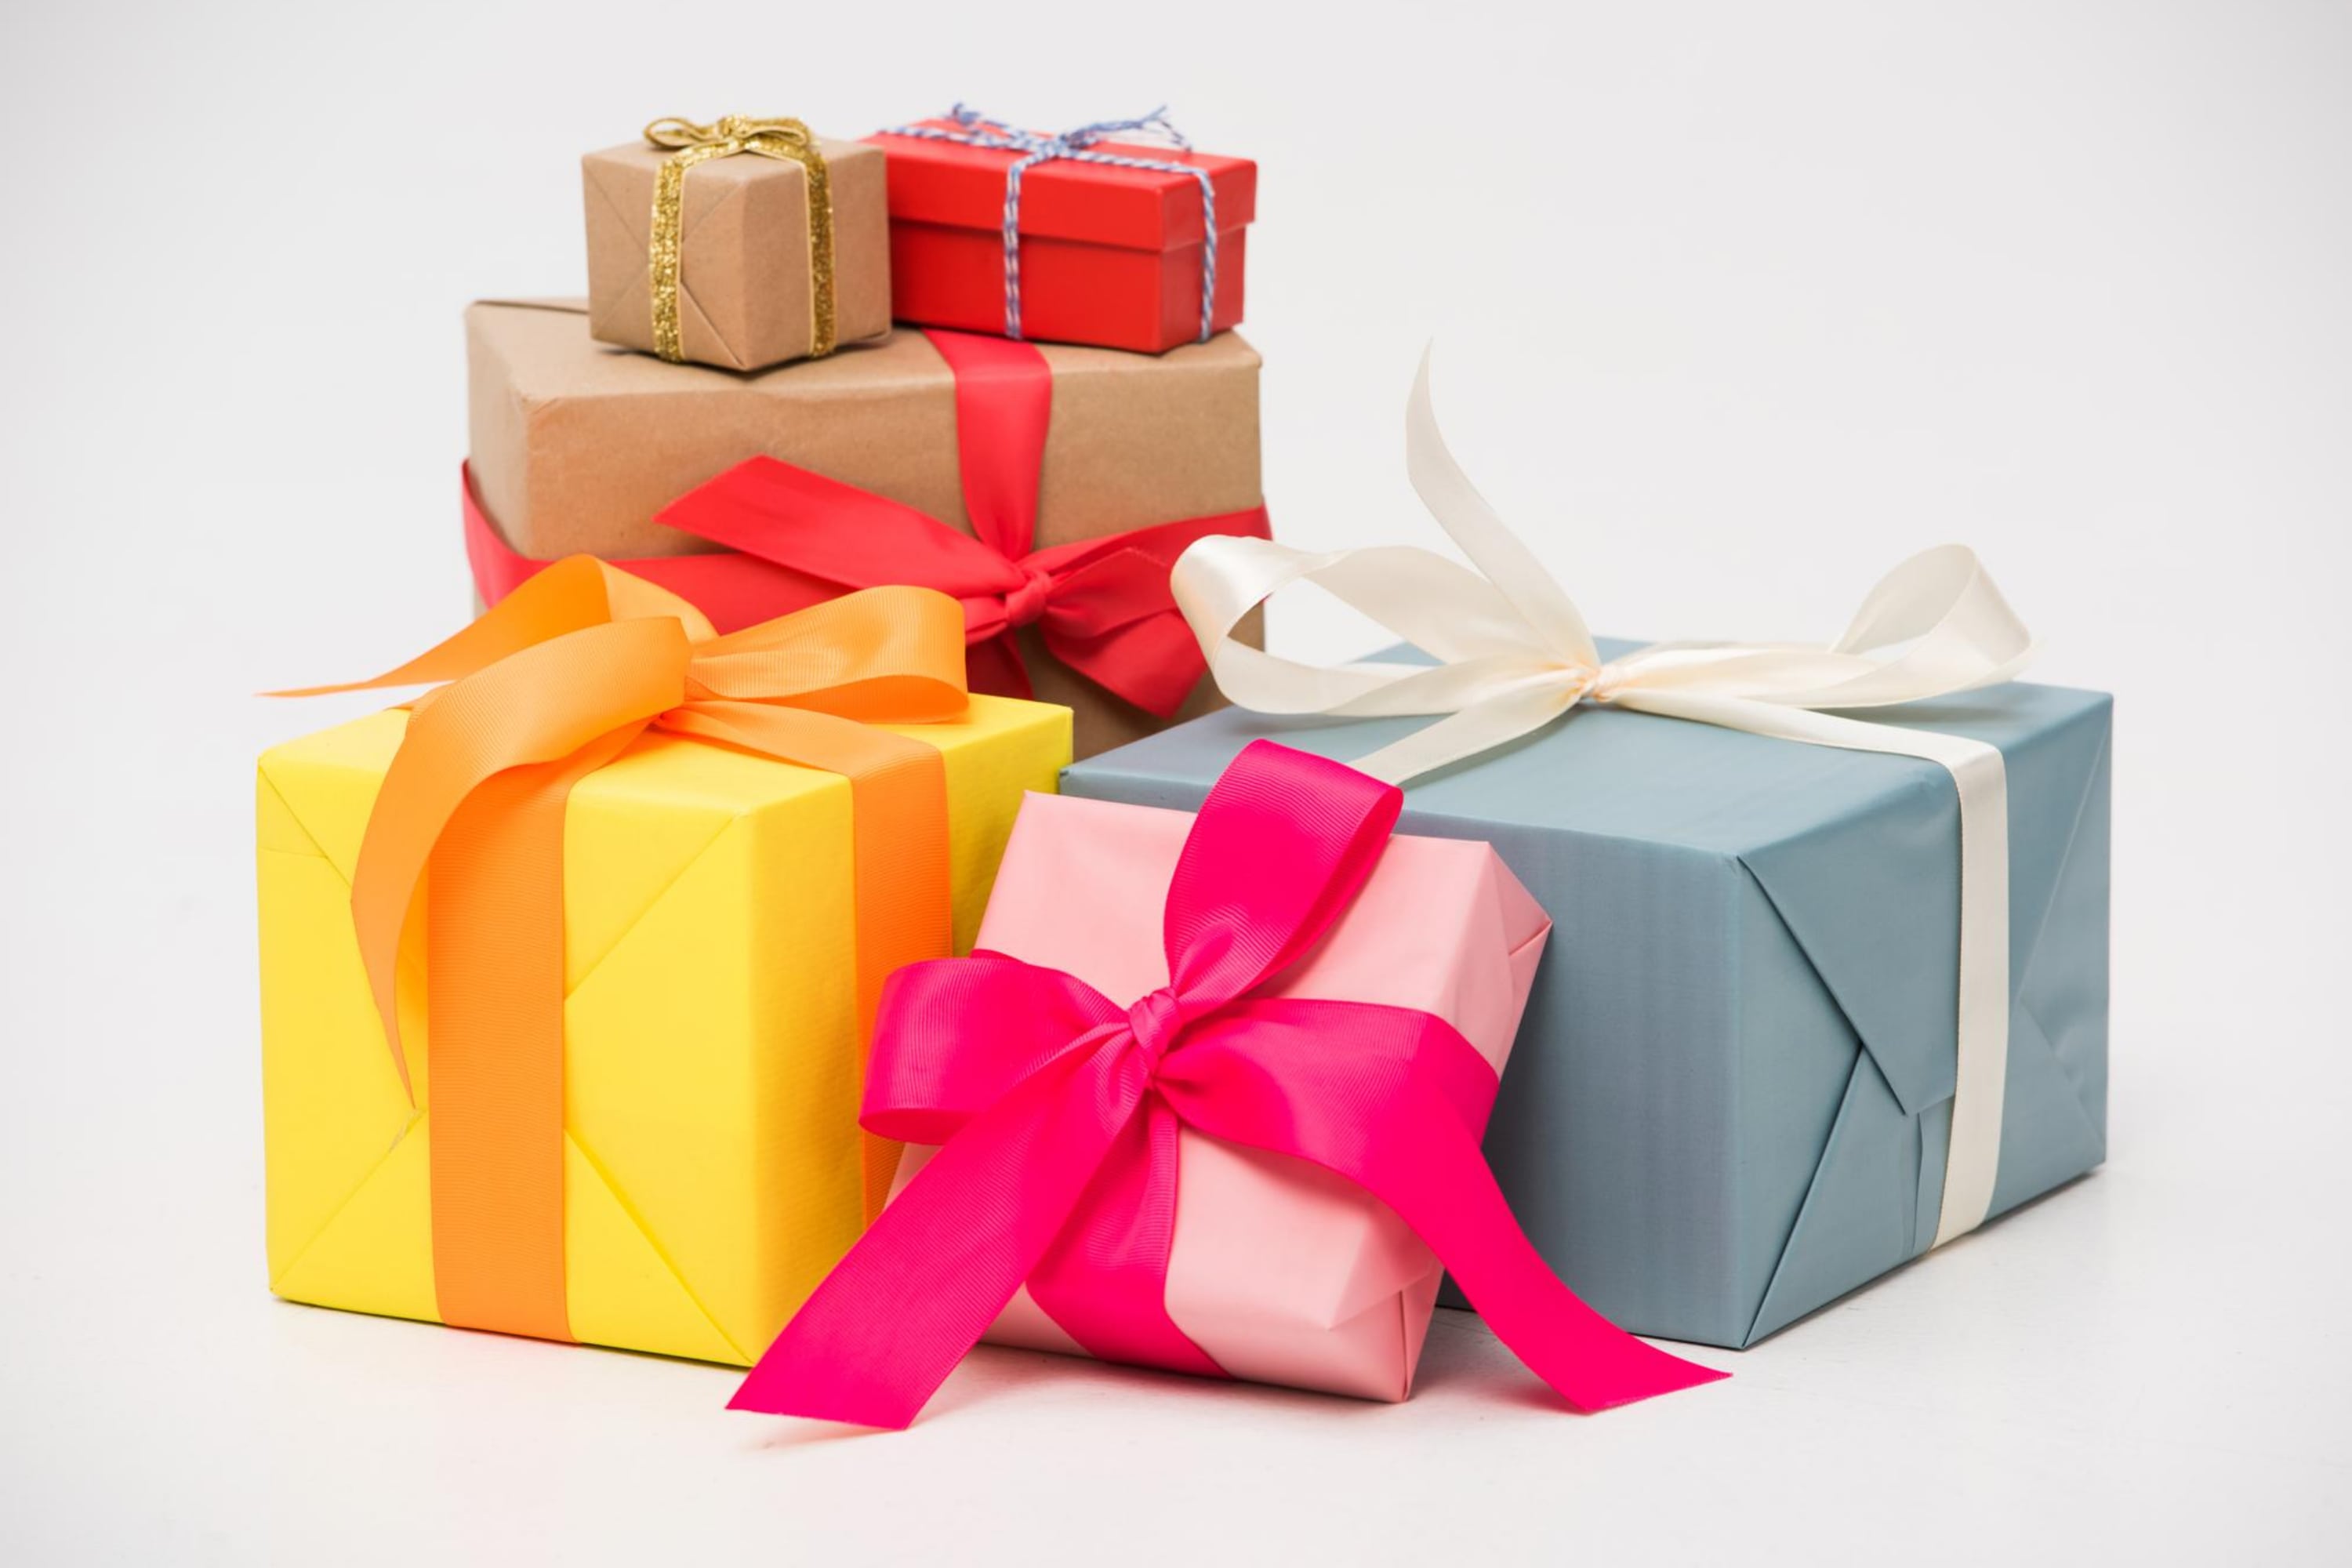 What Are The Benefits Of Giving Gifts